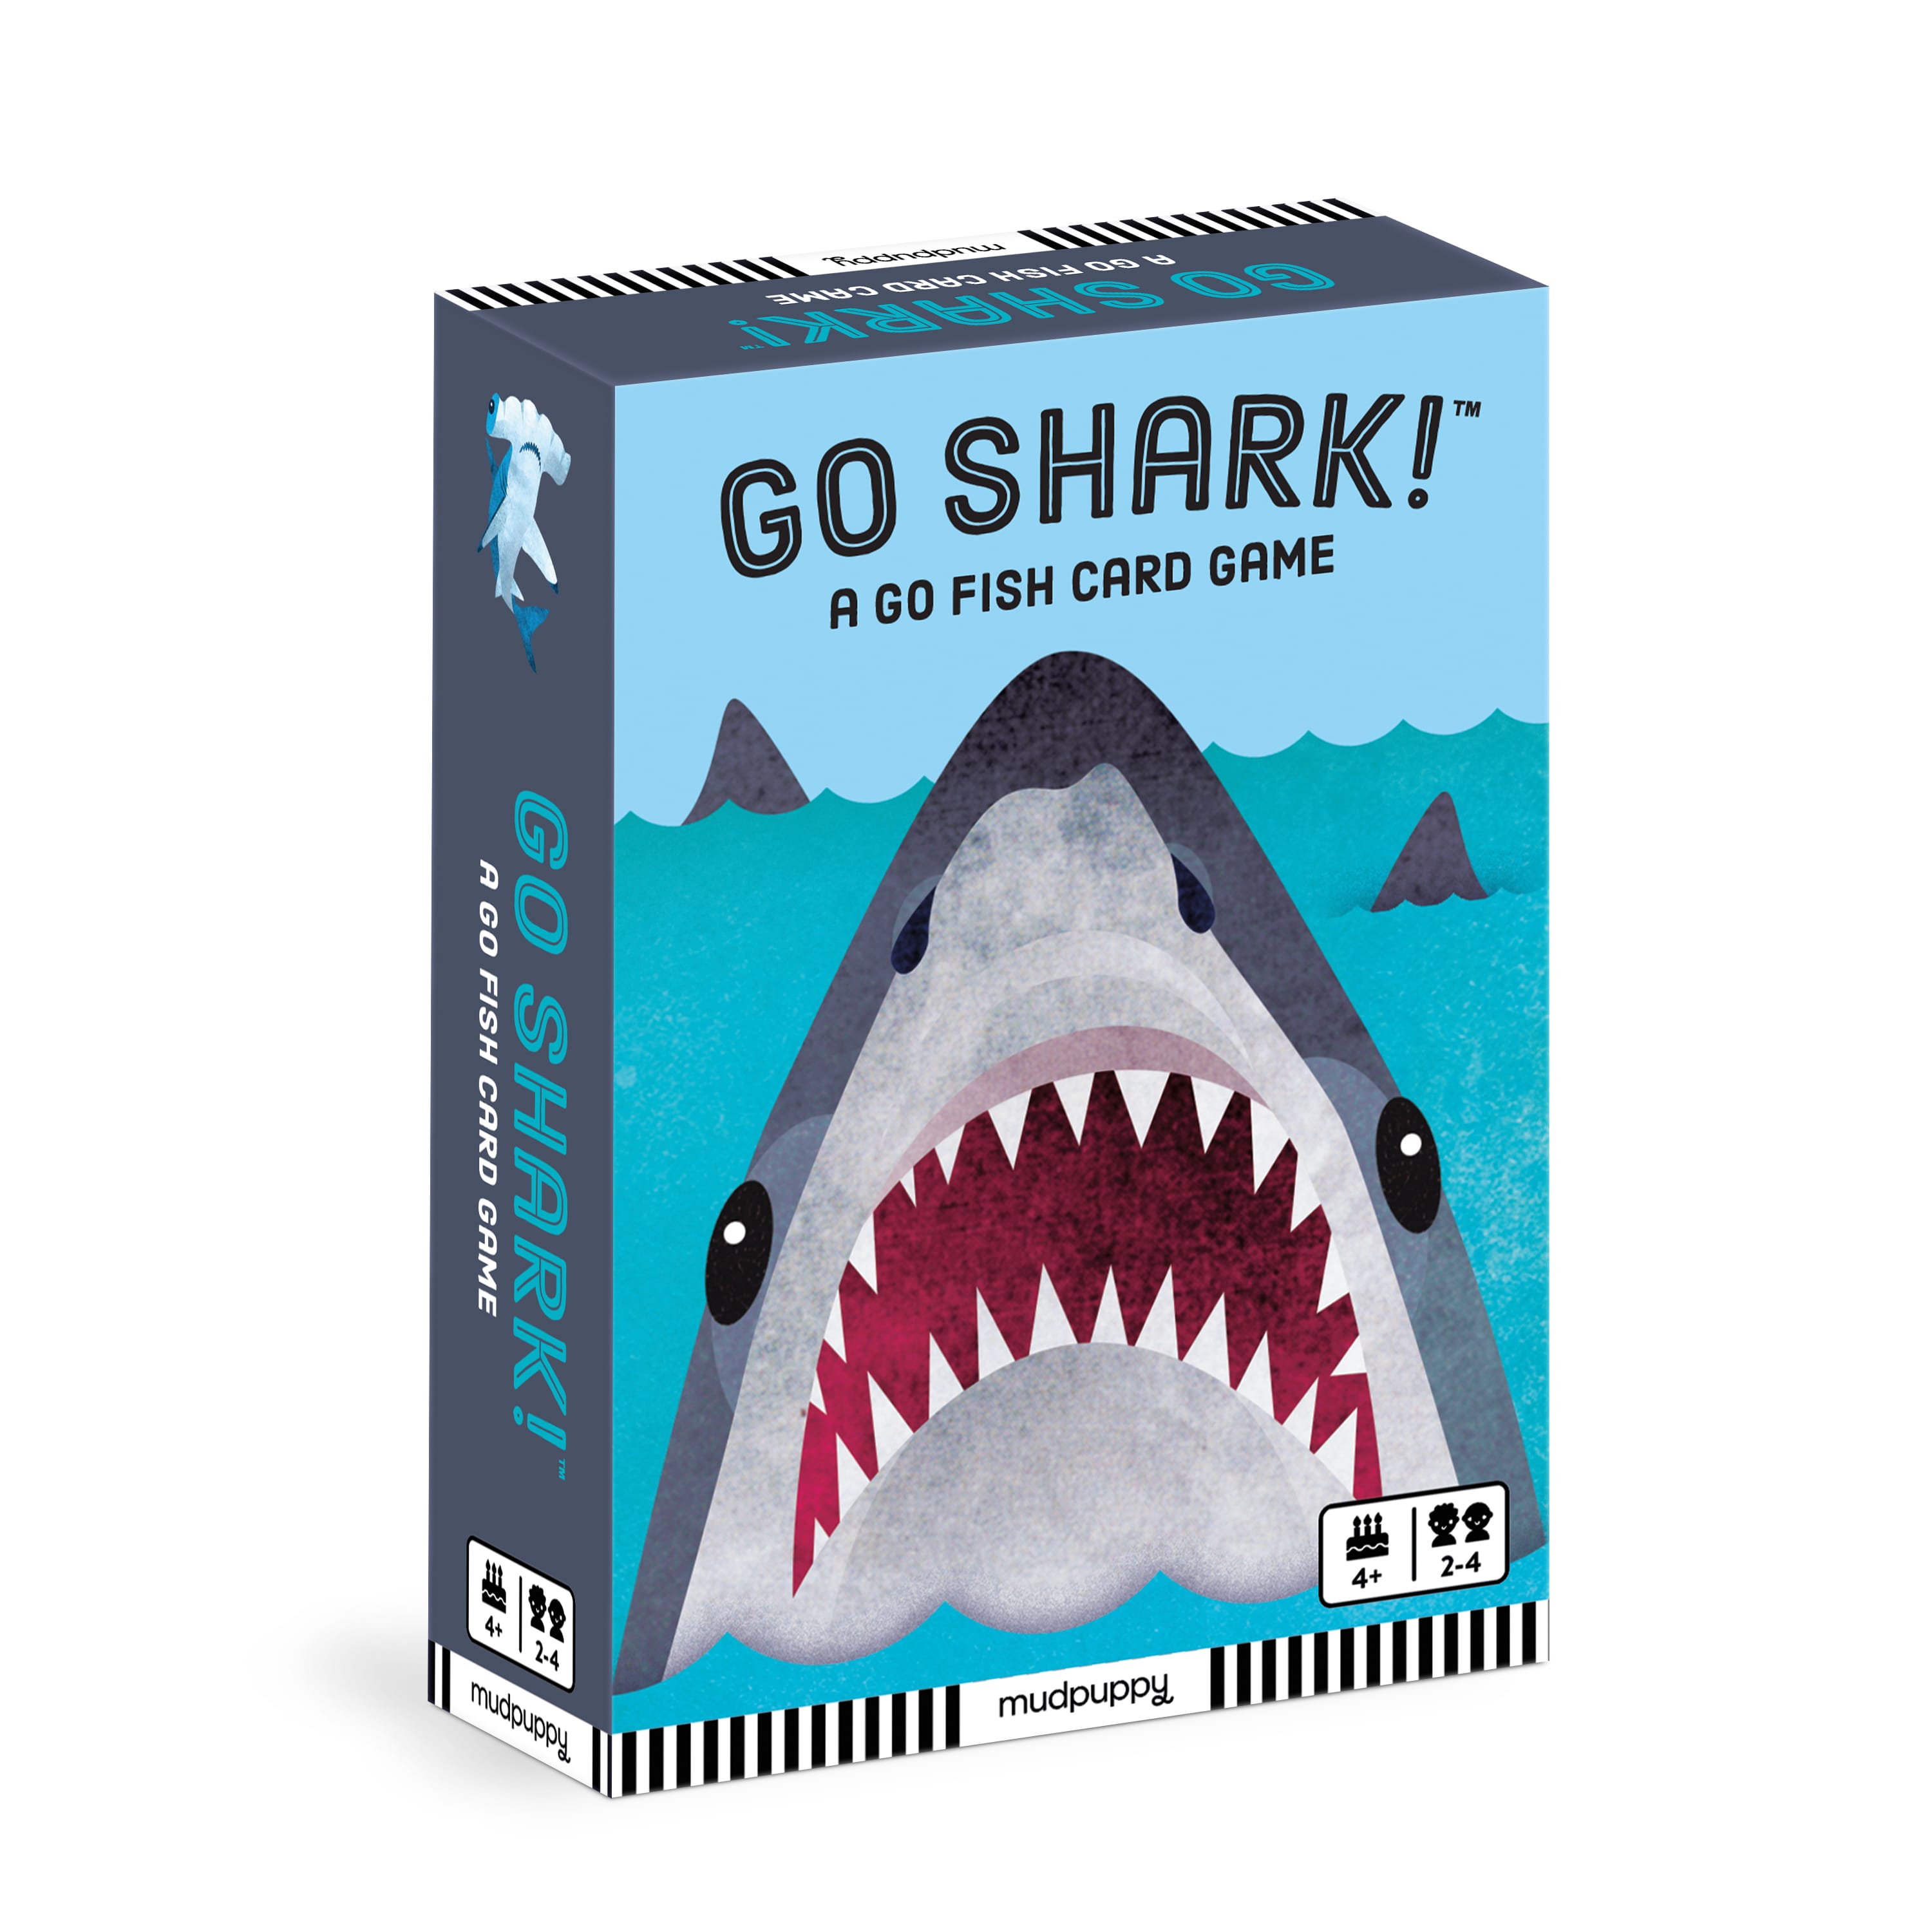 Shark Bite Game With Bonus Card Game, Silly & Whacky Games